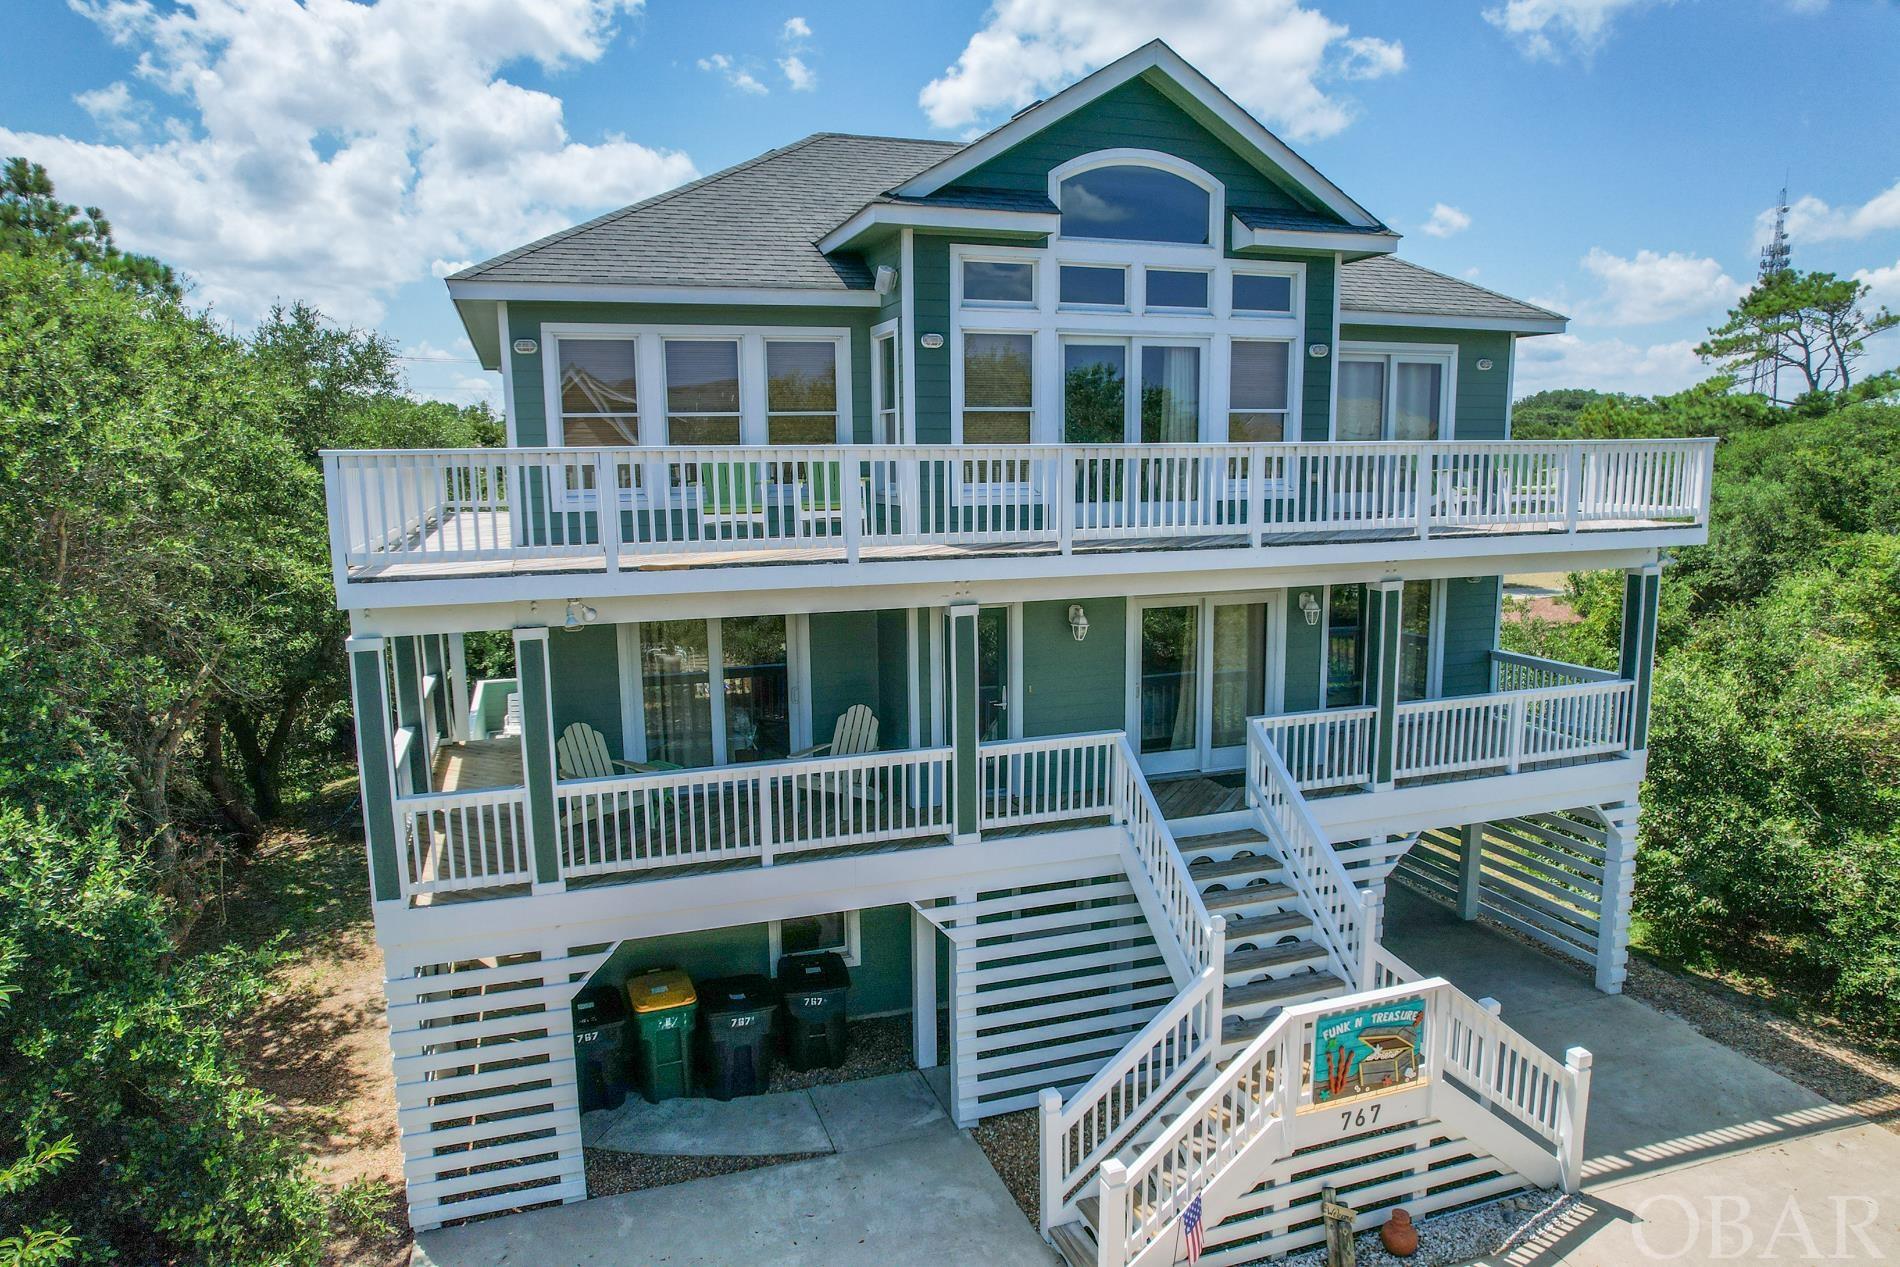 Nestled away on a cul-de-sac with an extremely thought out floor plan, this 3 story coastal vacation home is a rental powerhouse! Located on the ocean side of Route 12 in the Ocean Sands subdivision, it's only 3 blocks/.3 mile/6 mins from ocean access. This beauty sleeps 19! Top 3rd floor offers open concept great room (kitchen, dining and living areas) with cathedral ceilings. Lots of windows and 2 sliding glass doors to the 3rd floor sun deck which provides lots of light. Newer Lovesac furniture, large dining room table and a fully equipped kitchen including 2 dishwashers, 2 refrigerators, deep freezer, beverage fridge, pantry and FREIGHT LIFT which guests love. Also on 3rd floor, a half bath and primary bedroom w/ king bed, private sun deck access and ensuite bathroom. The 3rd floor primary ensuite bathroom has double vanity, soaking tub and full size shower. On the 2nd floor, there are 3 additional bedrooms with king beds and ensuites all of which have sliding glass doors providing access to 2nd floor covered deck. Also on 2nd floor, a 4th bedroom with a pyramid bunkbed, full sized hall bath and a flex space which is currently used as another bedroom with a queen bed. On ground level 1st floor you'll find a game room with pool table, wet bar, entertainment area, another 2 bedrooms (one with a queen bed and other with double bunk beds), a full size bath and laundry closet. Just outside the sliding glass doors of game room, you see a heated pool, hot tub, lounge chairs, gas grill, outdoor shower and owners storage. Back patio is fully enclosed and has the best of both worlds - partial sun and shade throughout entire day. Out front, a private basketball hoop in an oversized driveway fits up to 10 full size vehicles. Community bike path is just outside the neighborhood; the homes location makes for easy access to shopping and restaurants. Renters return to this home again and again; no wonder it had over $99K on the books for 2021, almost $66K for 2022, $68K for 2023 and already booked over $61K for upcoming 2024 season. Whether a private vacation home for yourself or continued investment rental, you definitely don’t want to miss out on this one!